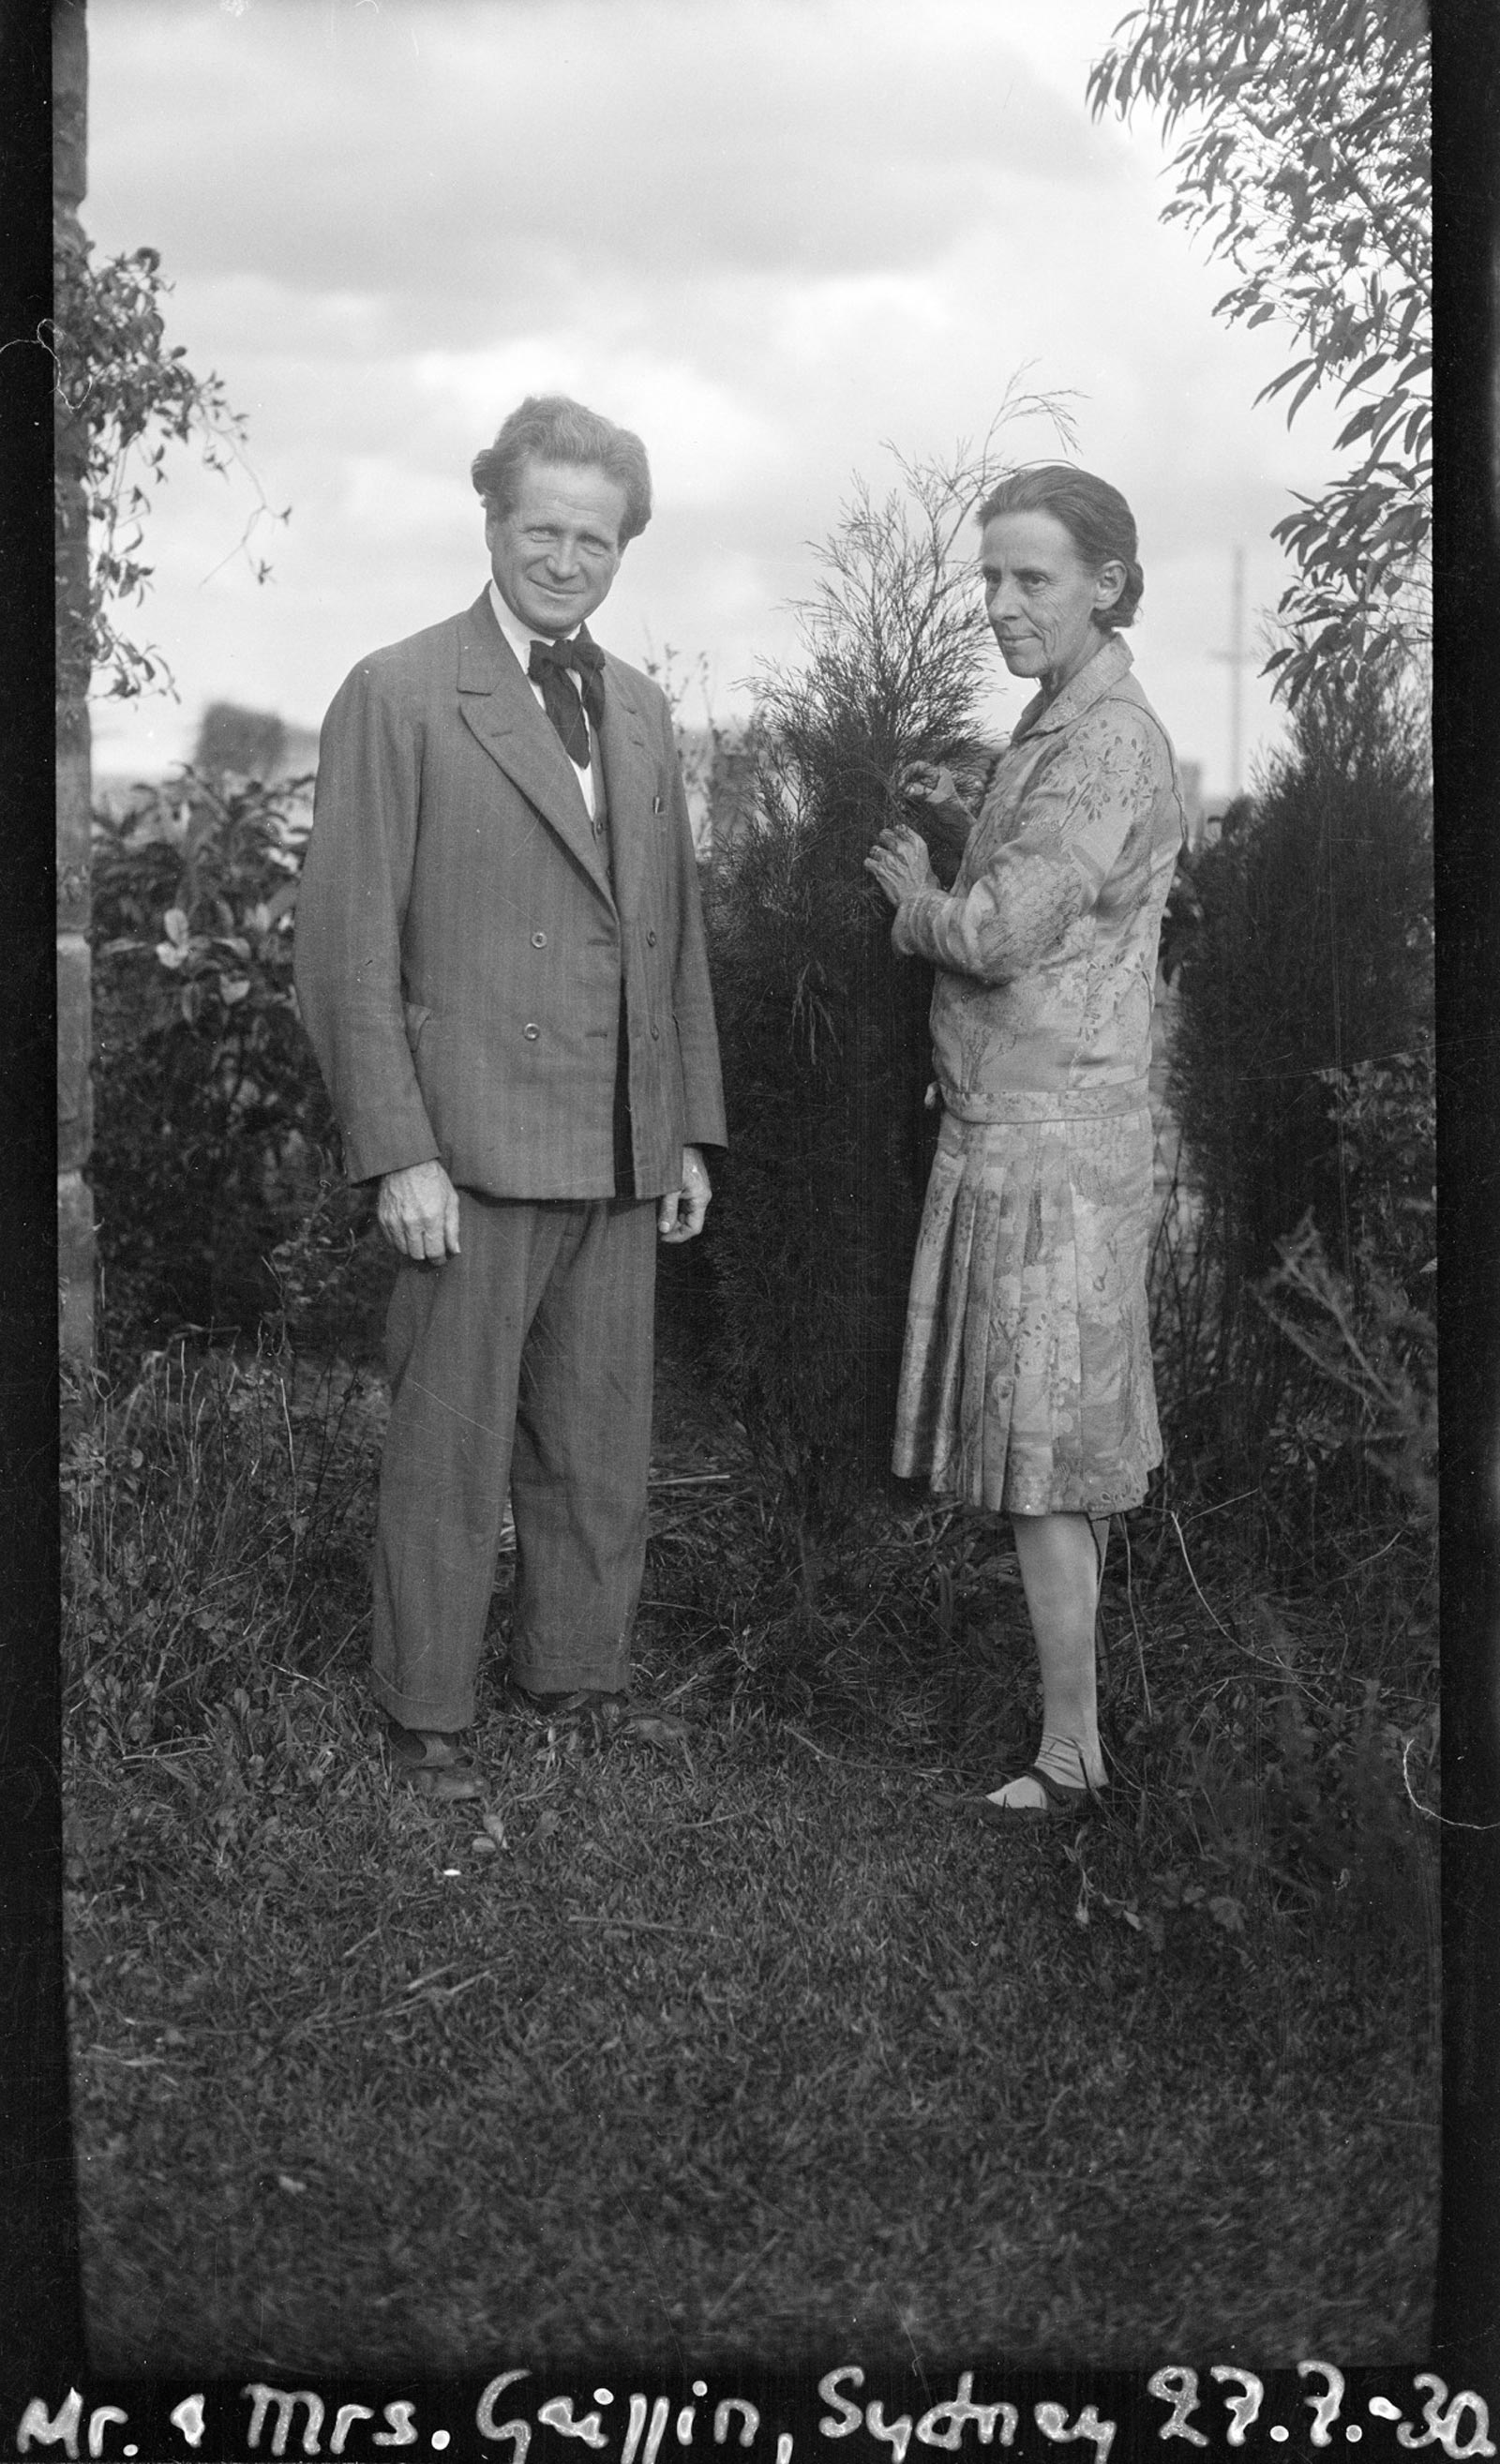 <p>Walter Burley Griffin and Marion Mahony, designers of Canberra, at Castlecrag, Sydney, 1930</p>
